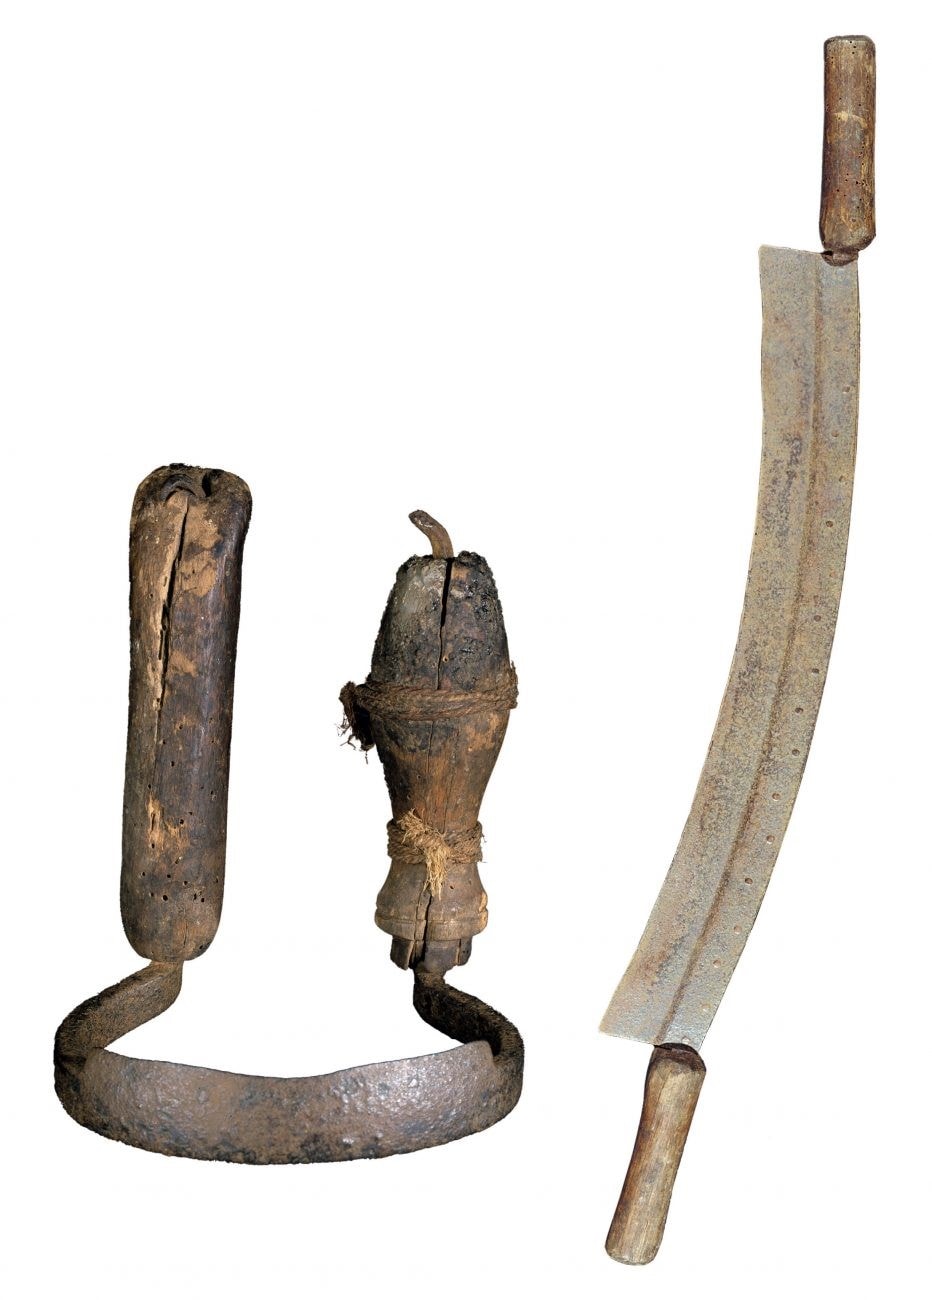 Whale harpoon and gum scraper used by Jacky Guard for whaling operations which are currently in the collections of Te Papa.